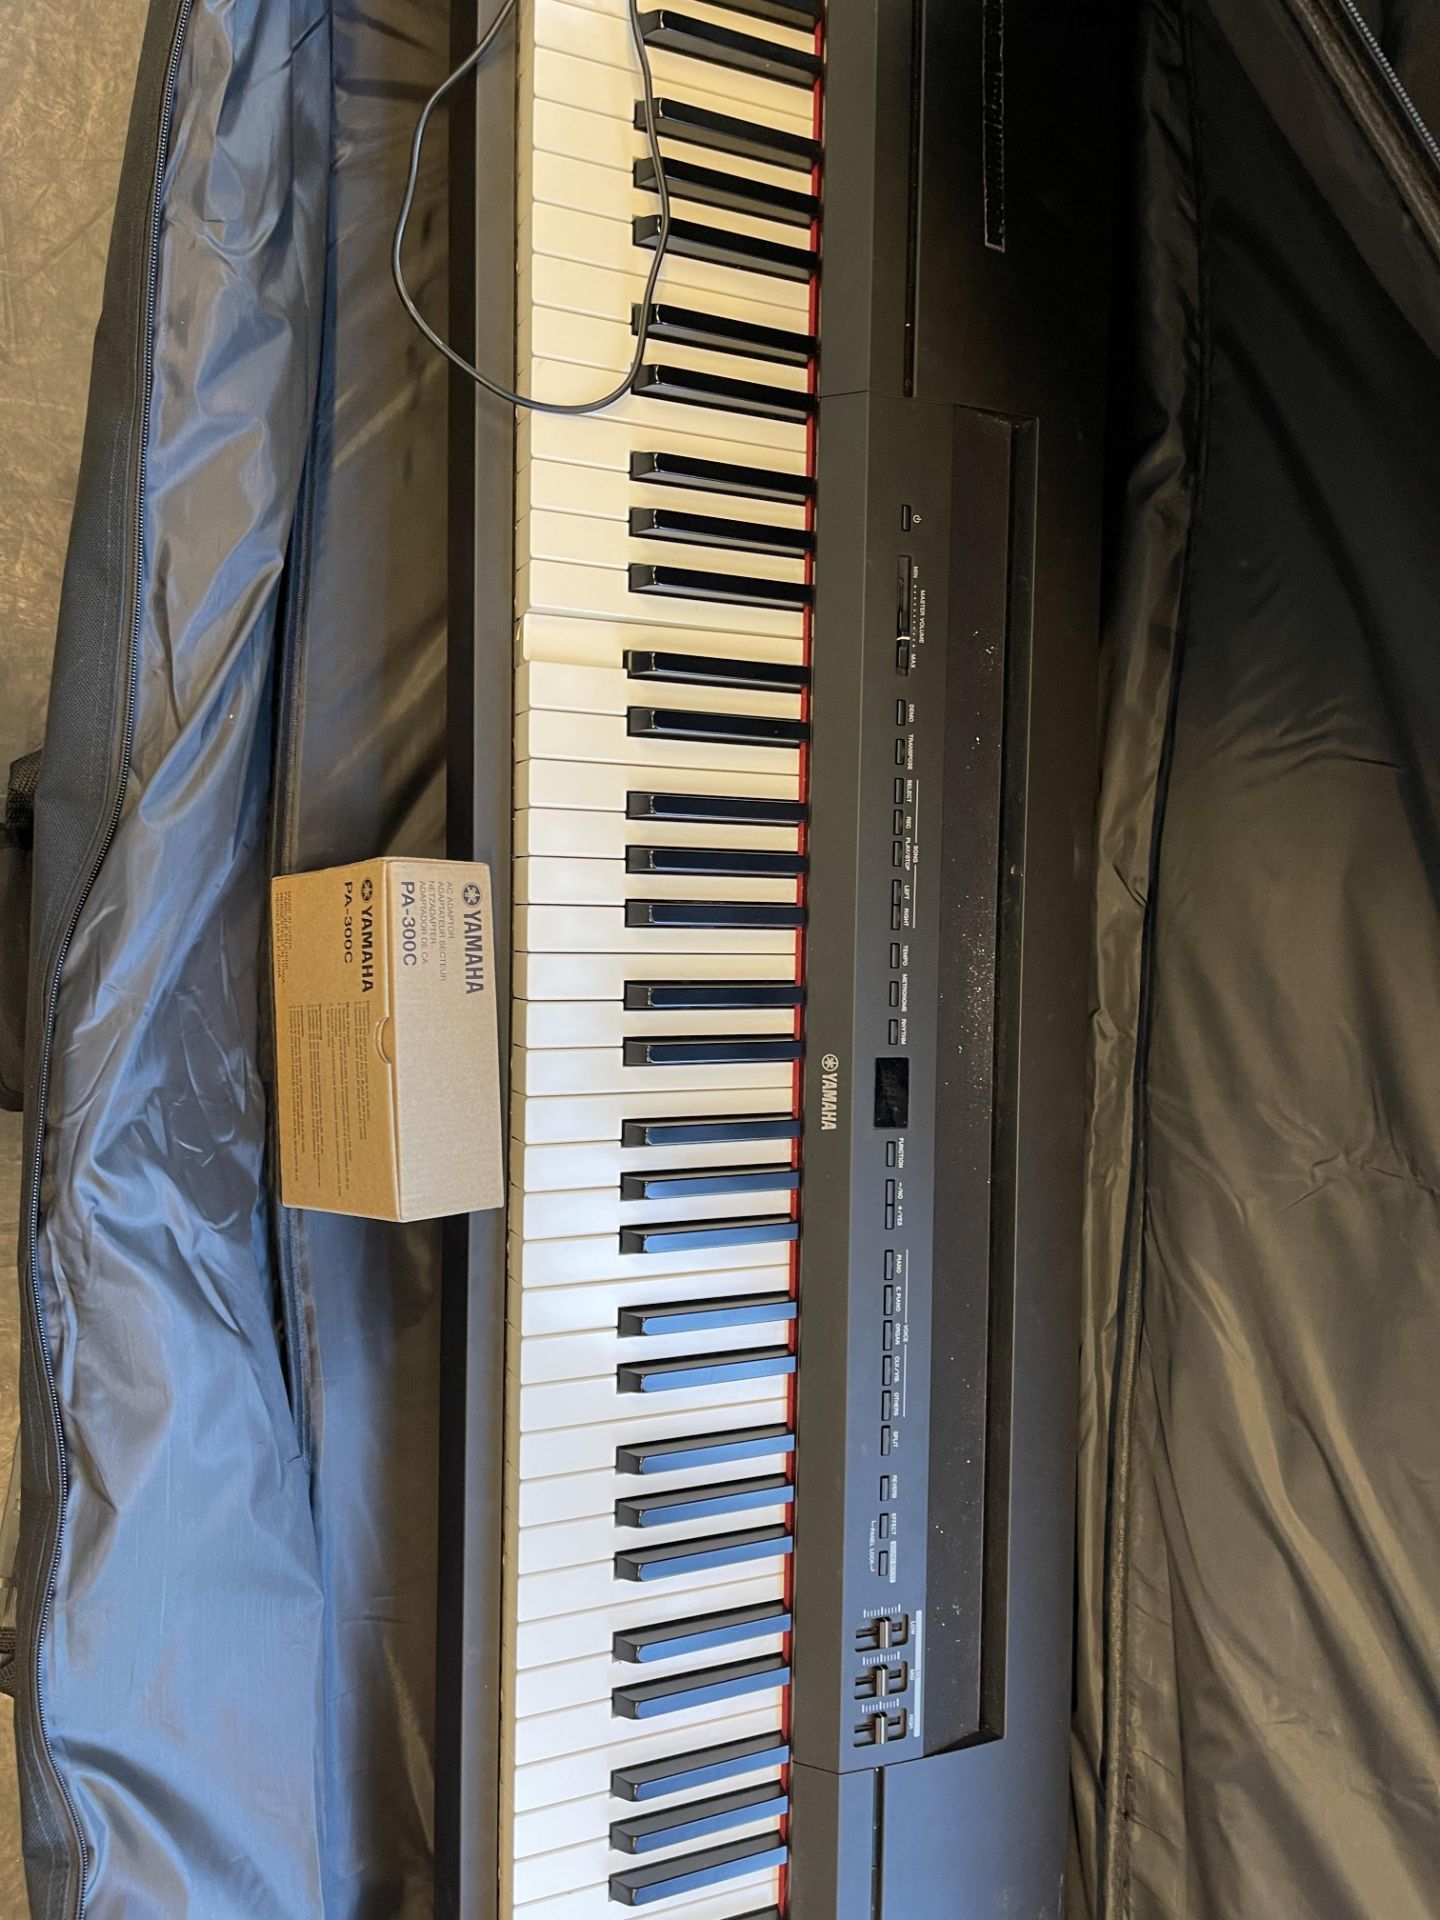 Yamaha P-255B Digital Piano Complete with Charger, M Gear Pedal and Case - Image 12 of 13